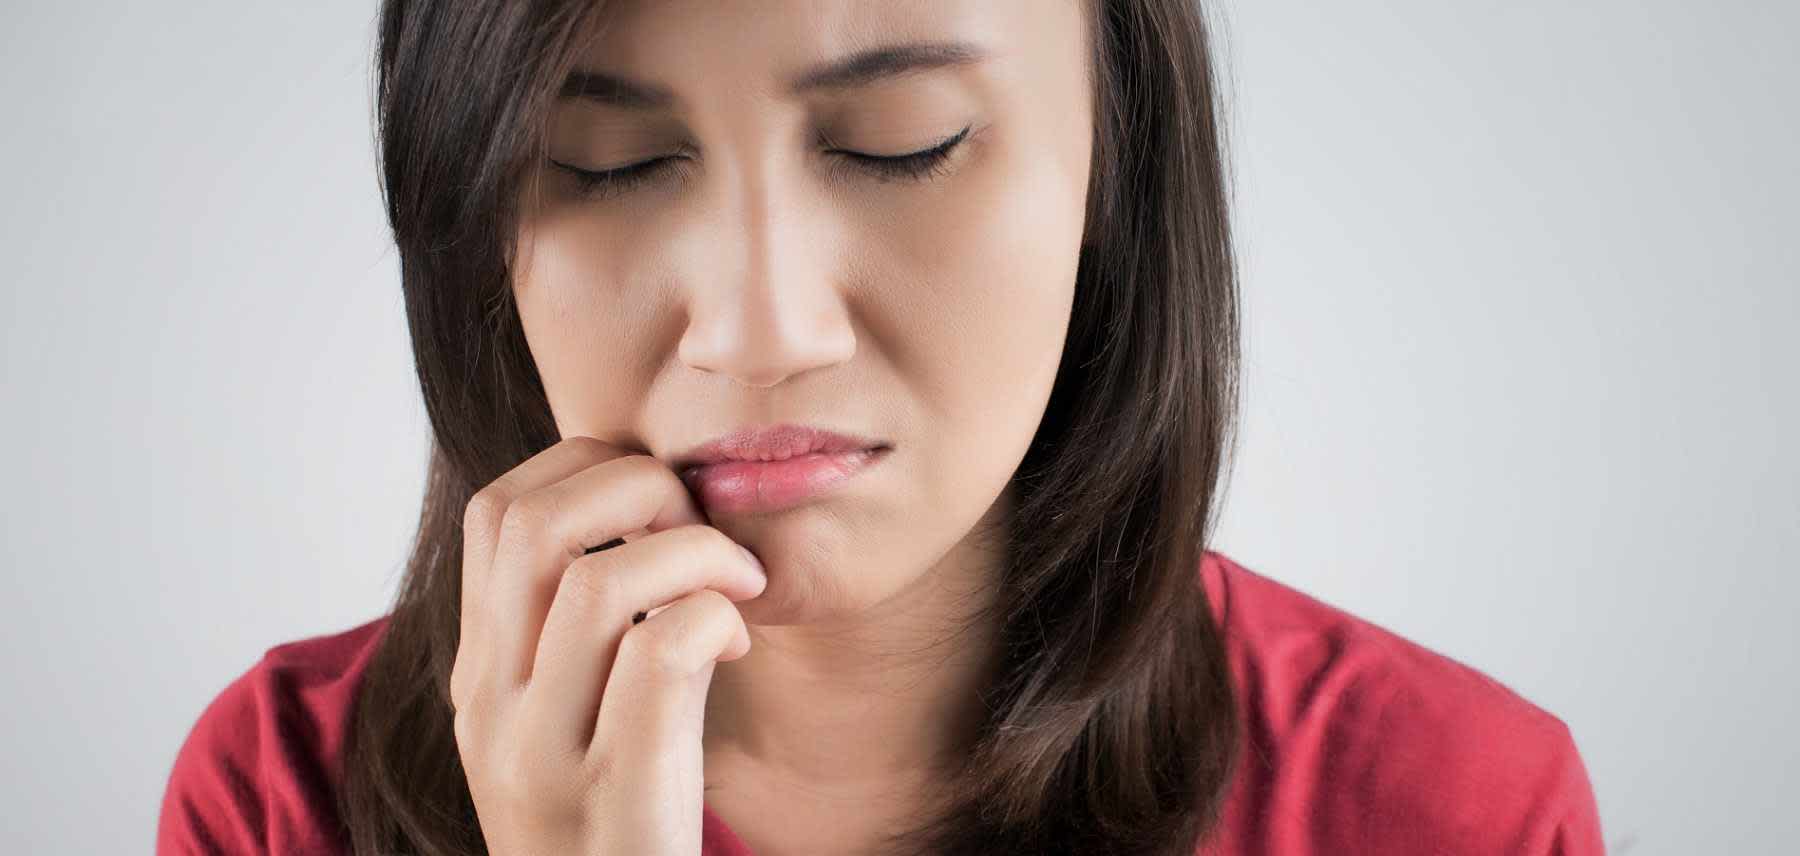 Woman with vitamin D deficiency experiencing dental pain